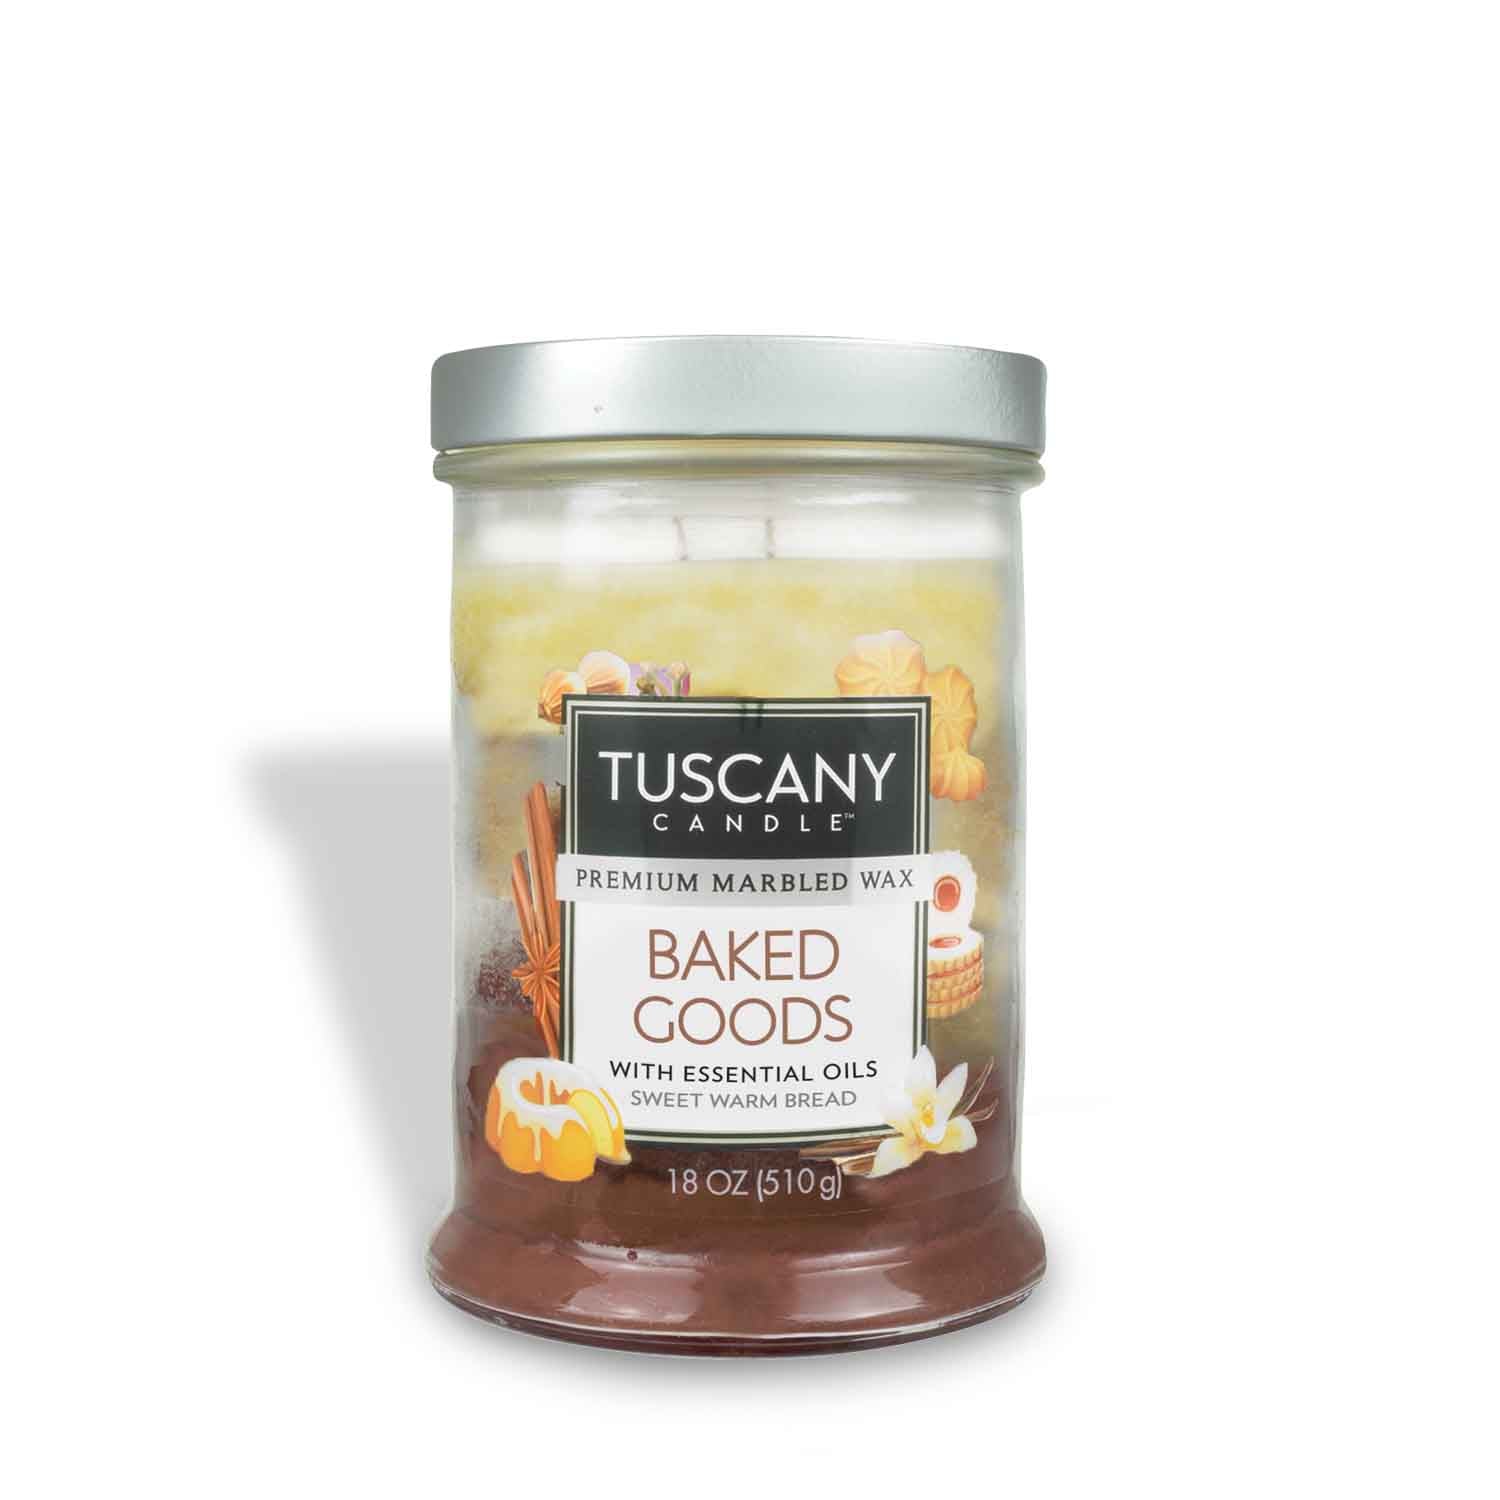 Tuscany Candle® EVD - Baked Goods Long-Lasting Scented Jar Candle (18 oz) with fragrances.